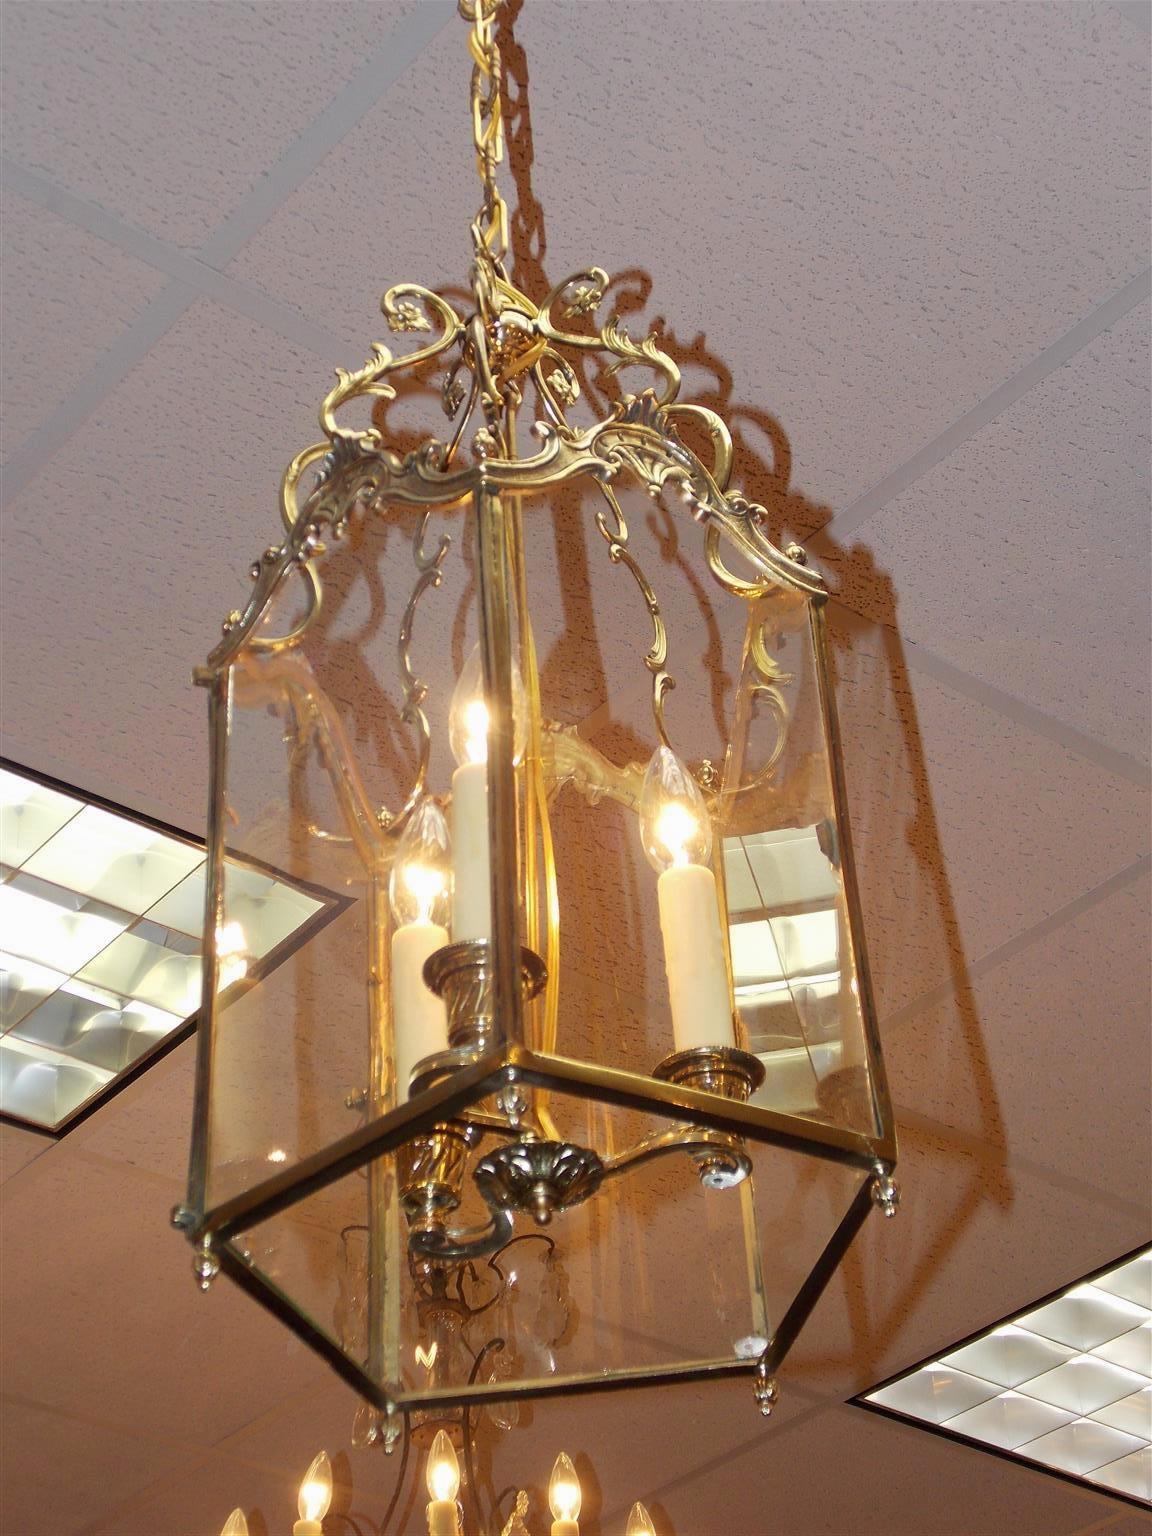 English brass hanging hall lantern with scrolled floral arms, five arched floral glass panes, hinged locking door,  interior three light cluster, and resting on floral bulbous finials. Originally candles and has been electrified, Early 19th century.